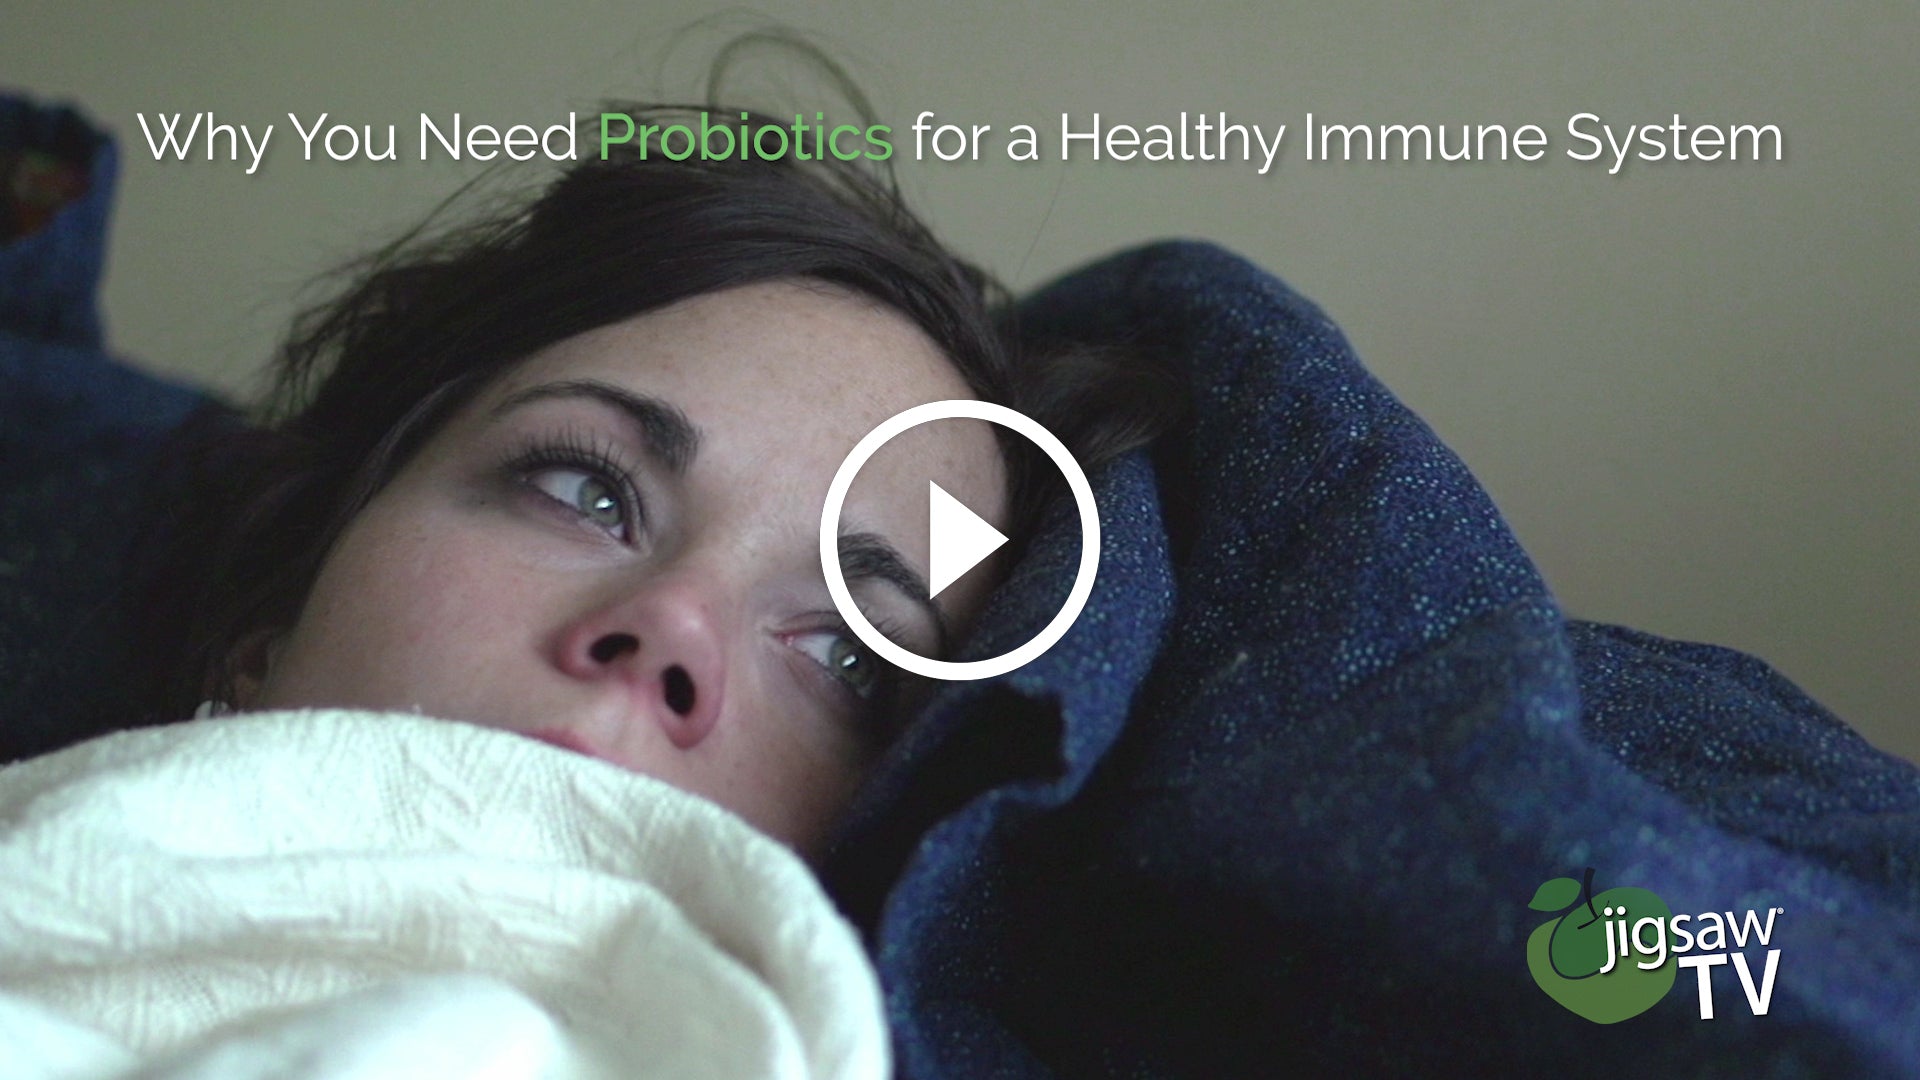 Why You Need Probiotics for a Healthy Immune System